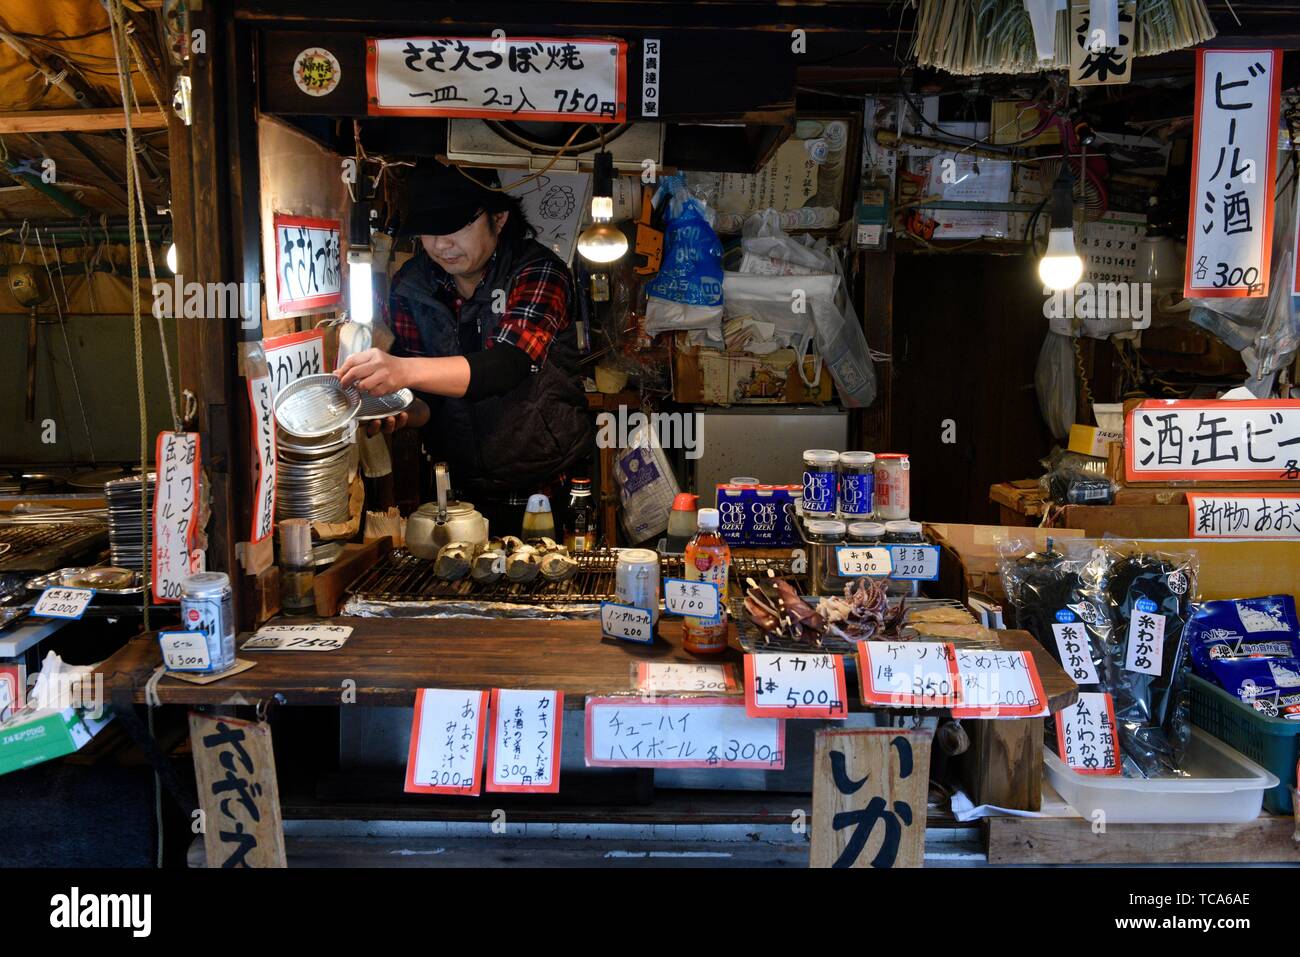 Man cooking oyster at Ise, Japan, Asia. Stock Photo